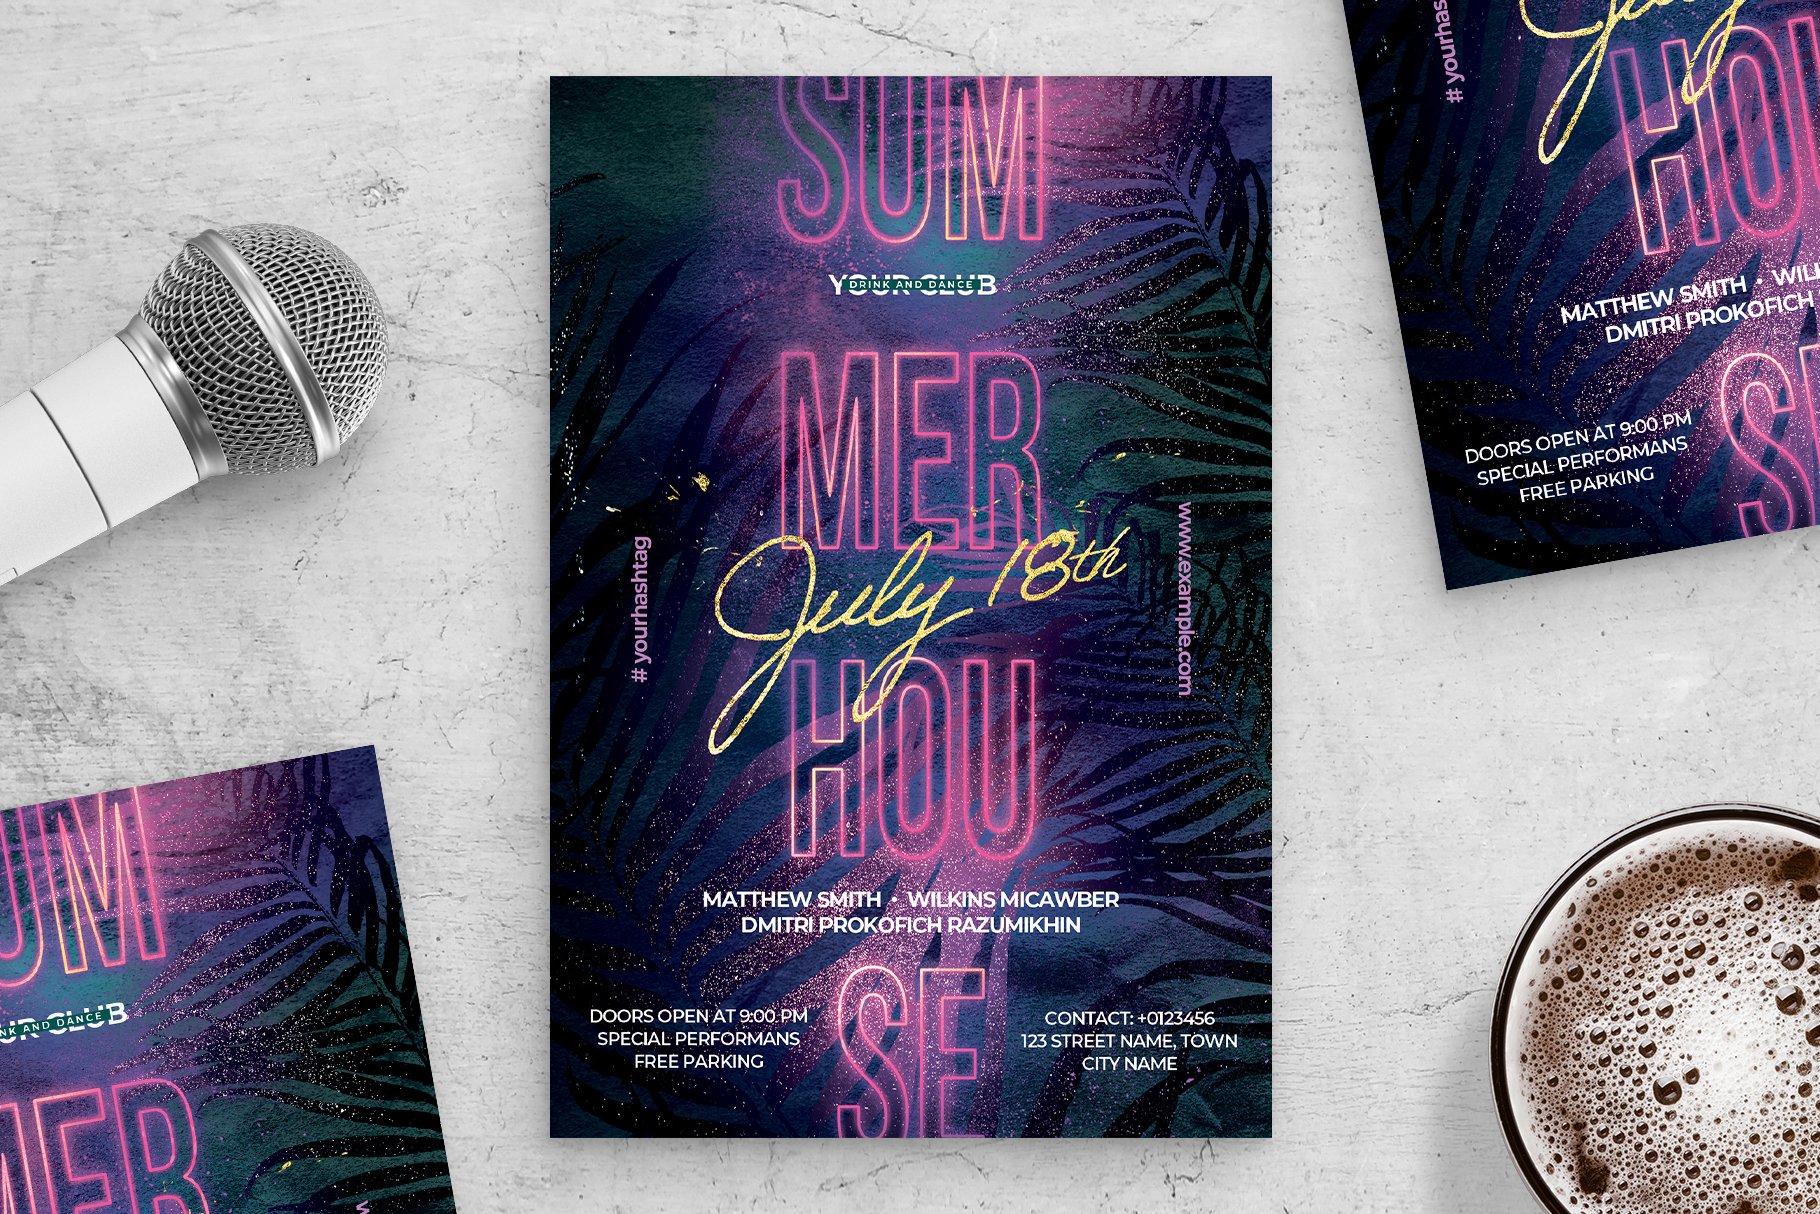 Summer House DJ Flyer + Banners cover image.